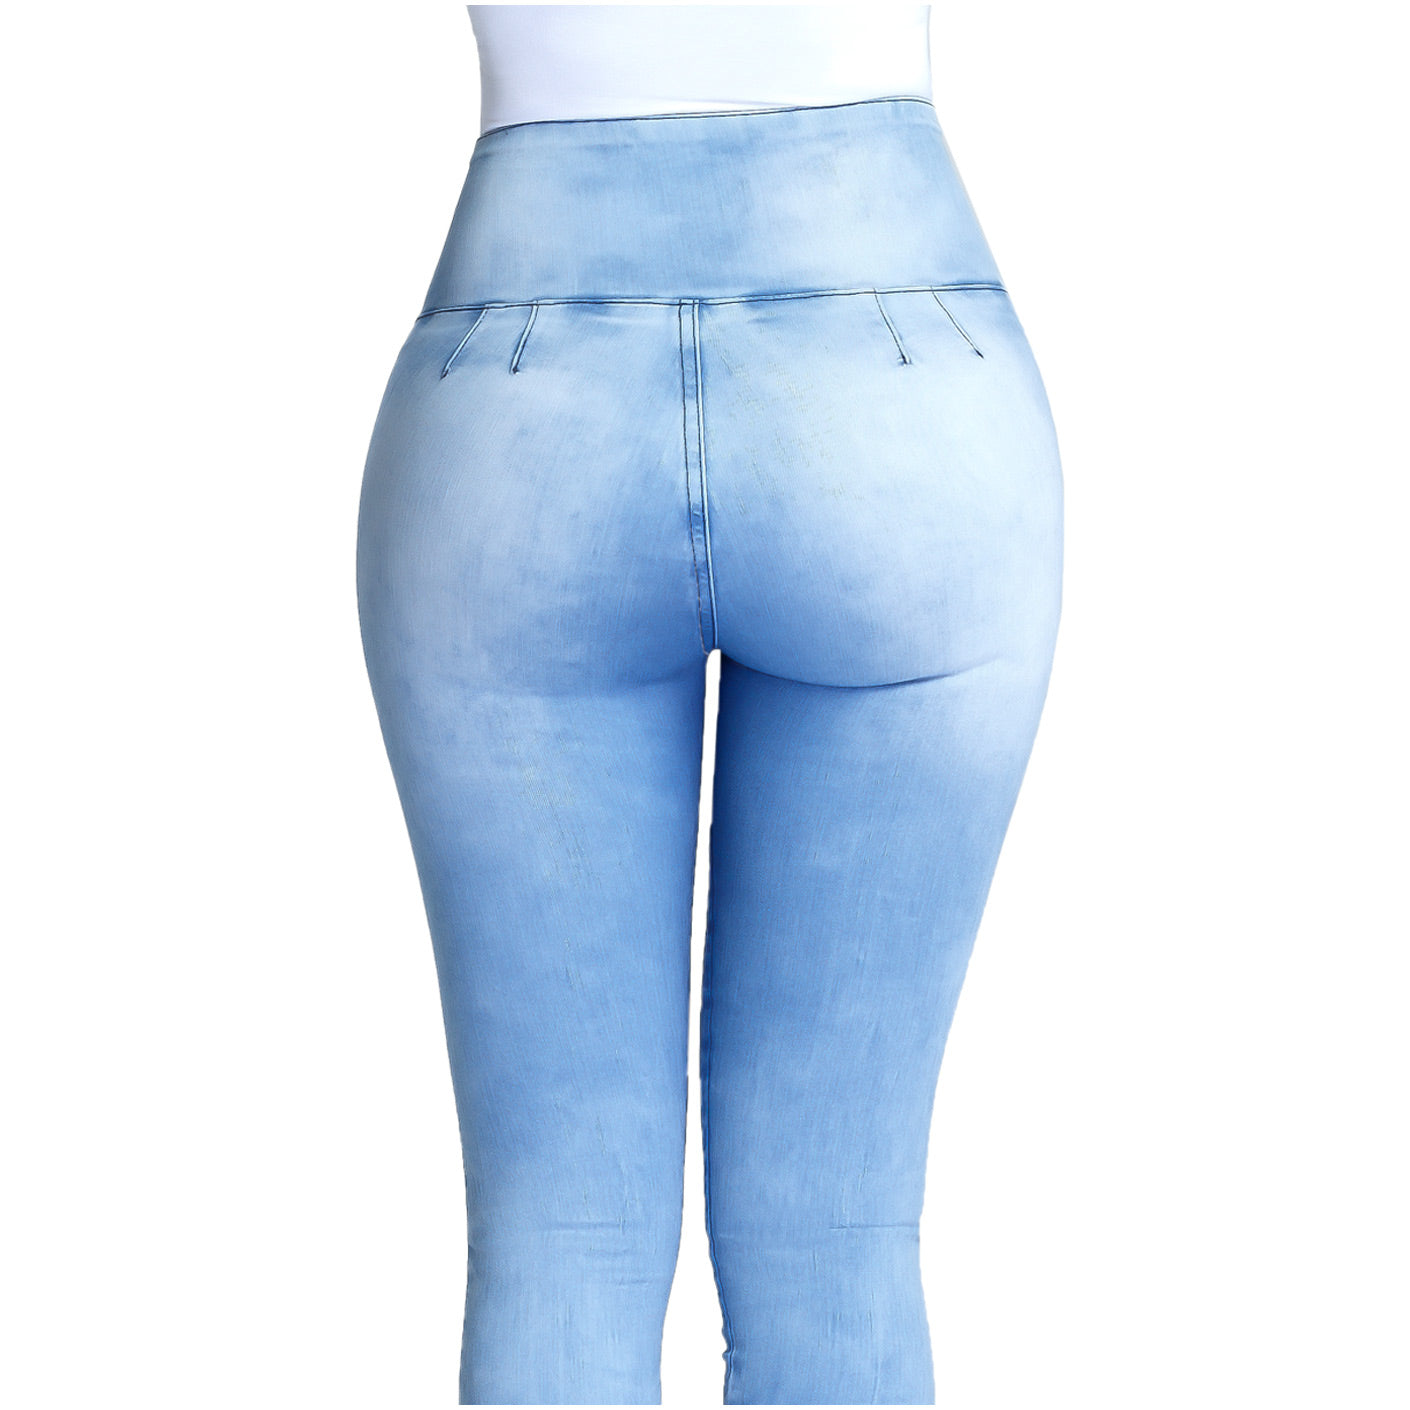 Lowla 217988 Skinny Colombian Butt Lifter Jeans with Removable Pads